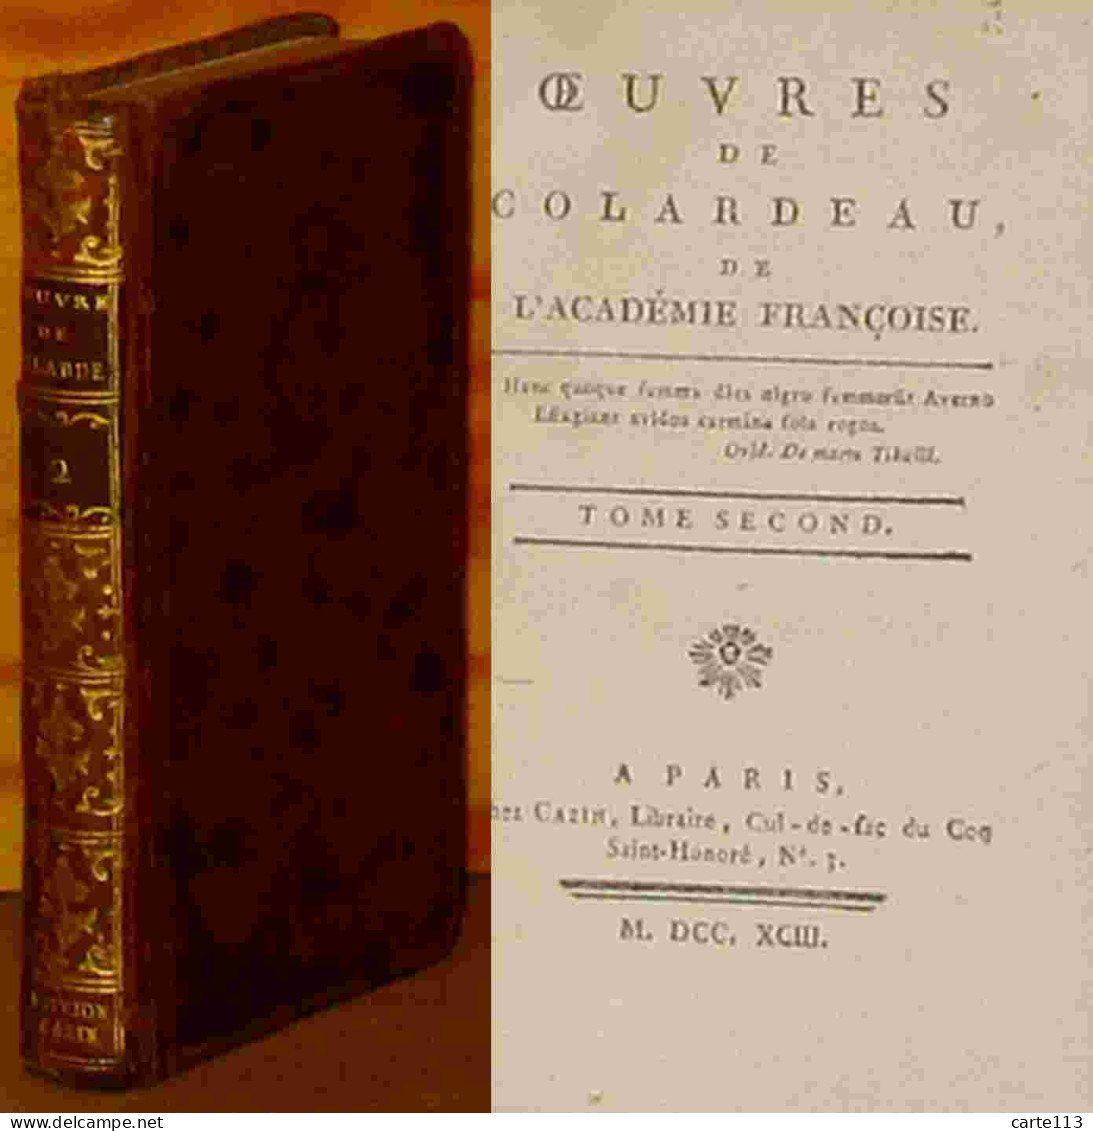 COLARDEAU Charles-Pierre - OEUVRES - TOME 2 - CAZIN - 1701-1800